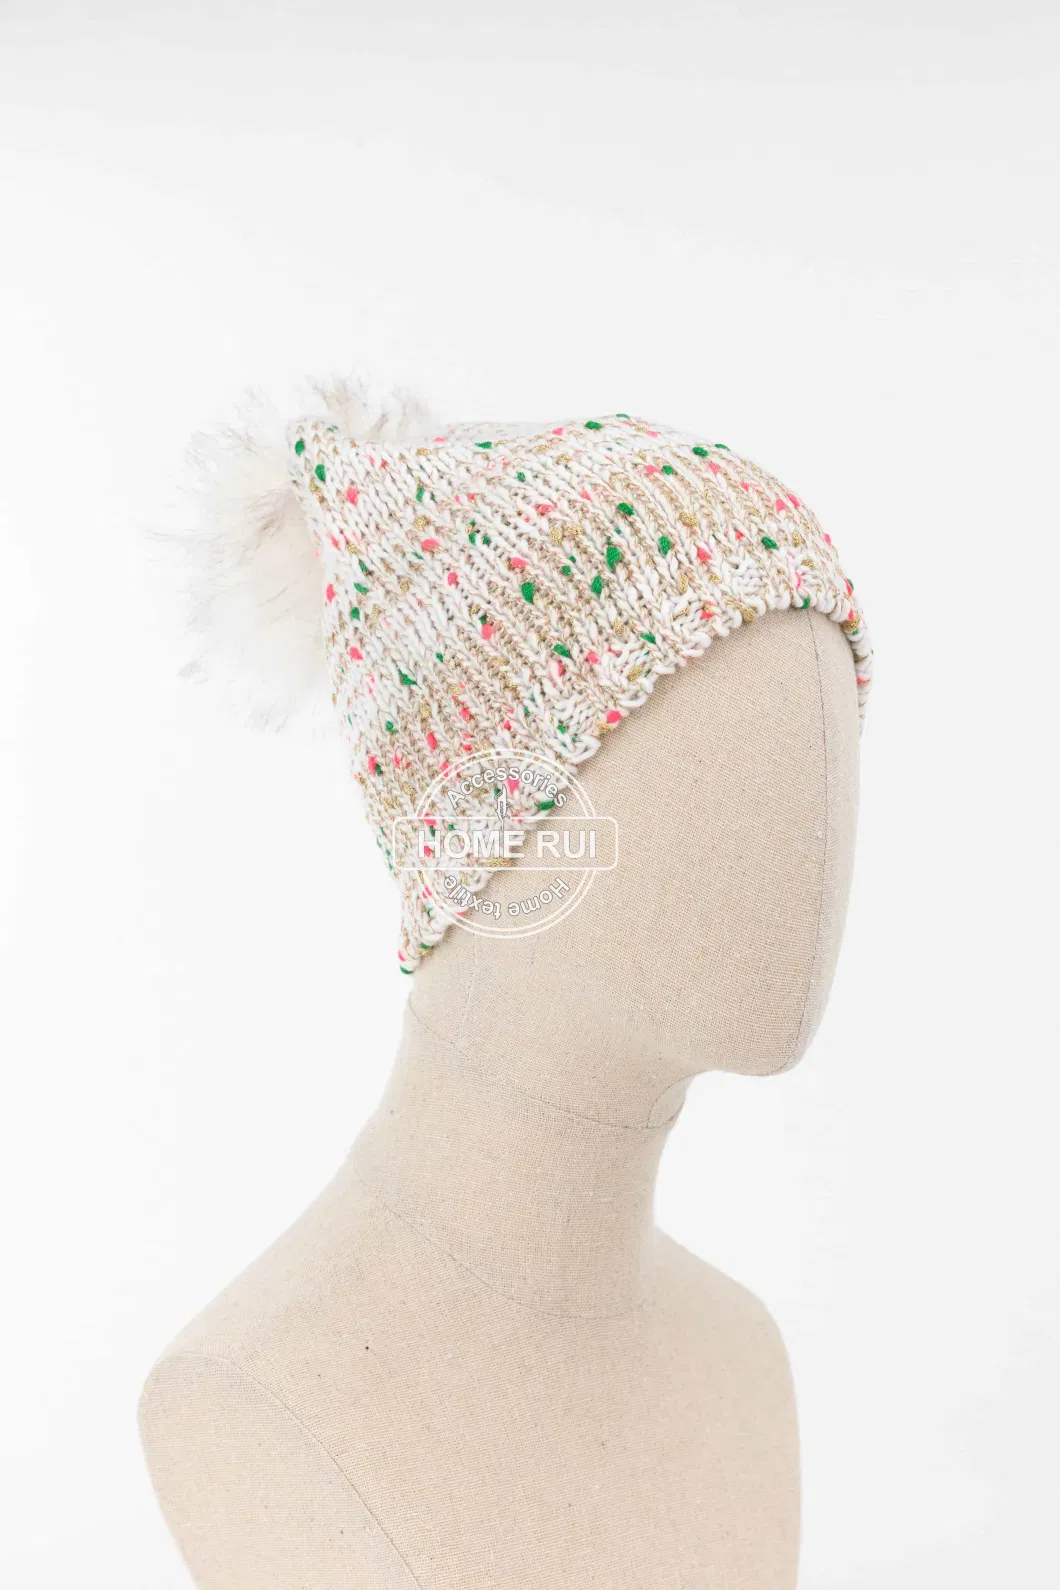 Women Warm Soft Acrylic White Fur Pompom Blended Mixed Colour Neps Metalic Yarn Knitted Rib Bonnet Casual Hat Beanie